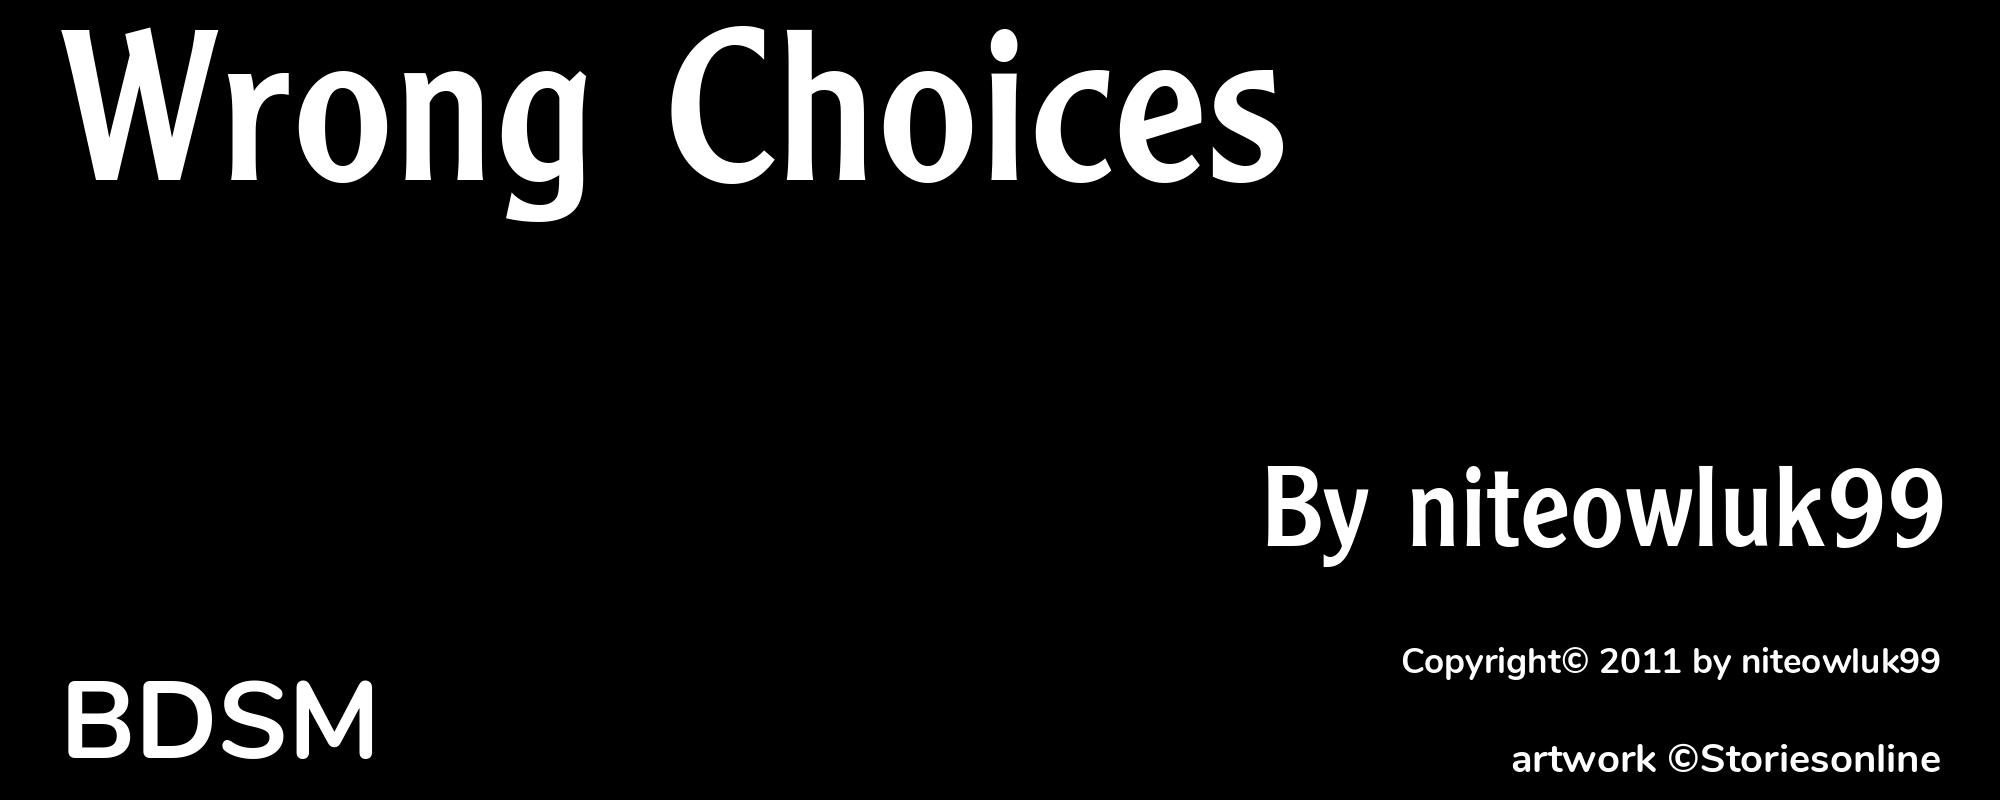 Wrong Choices - Cover